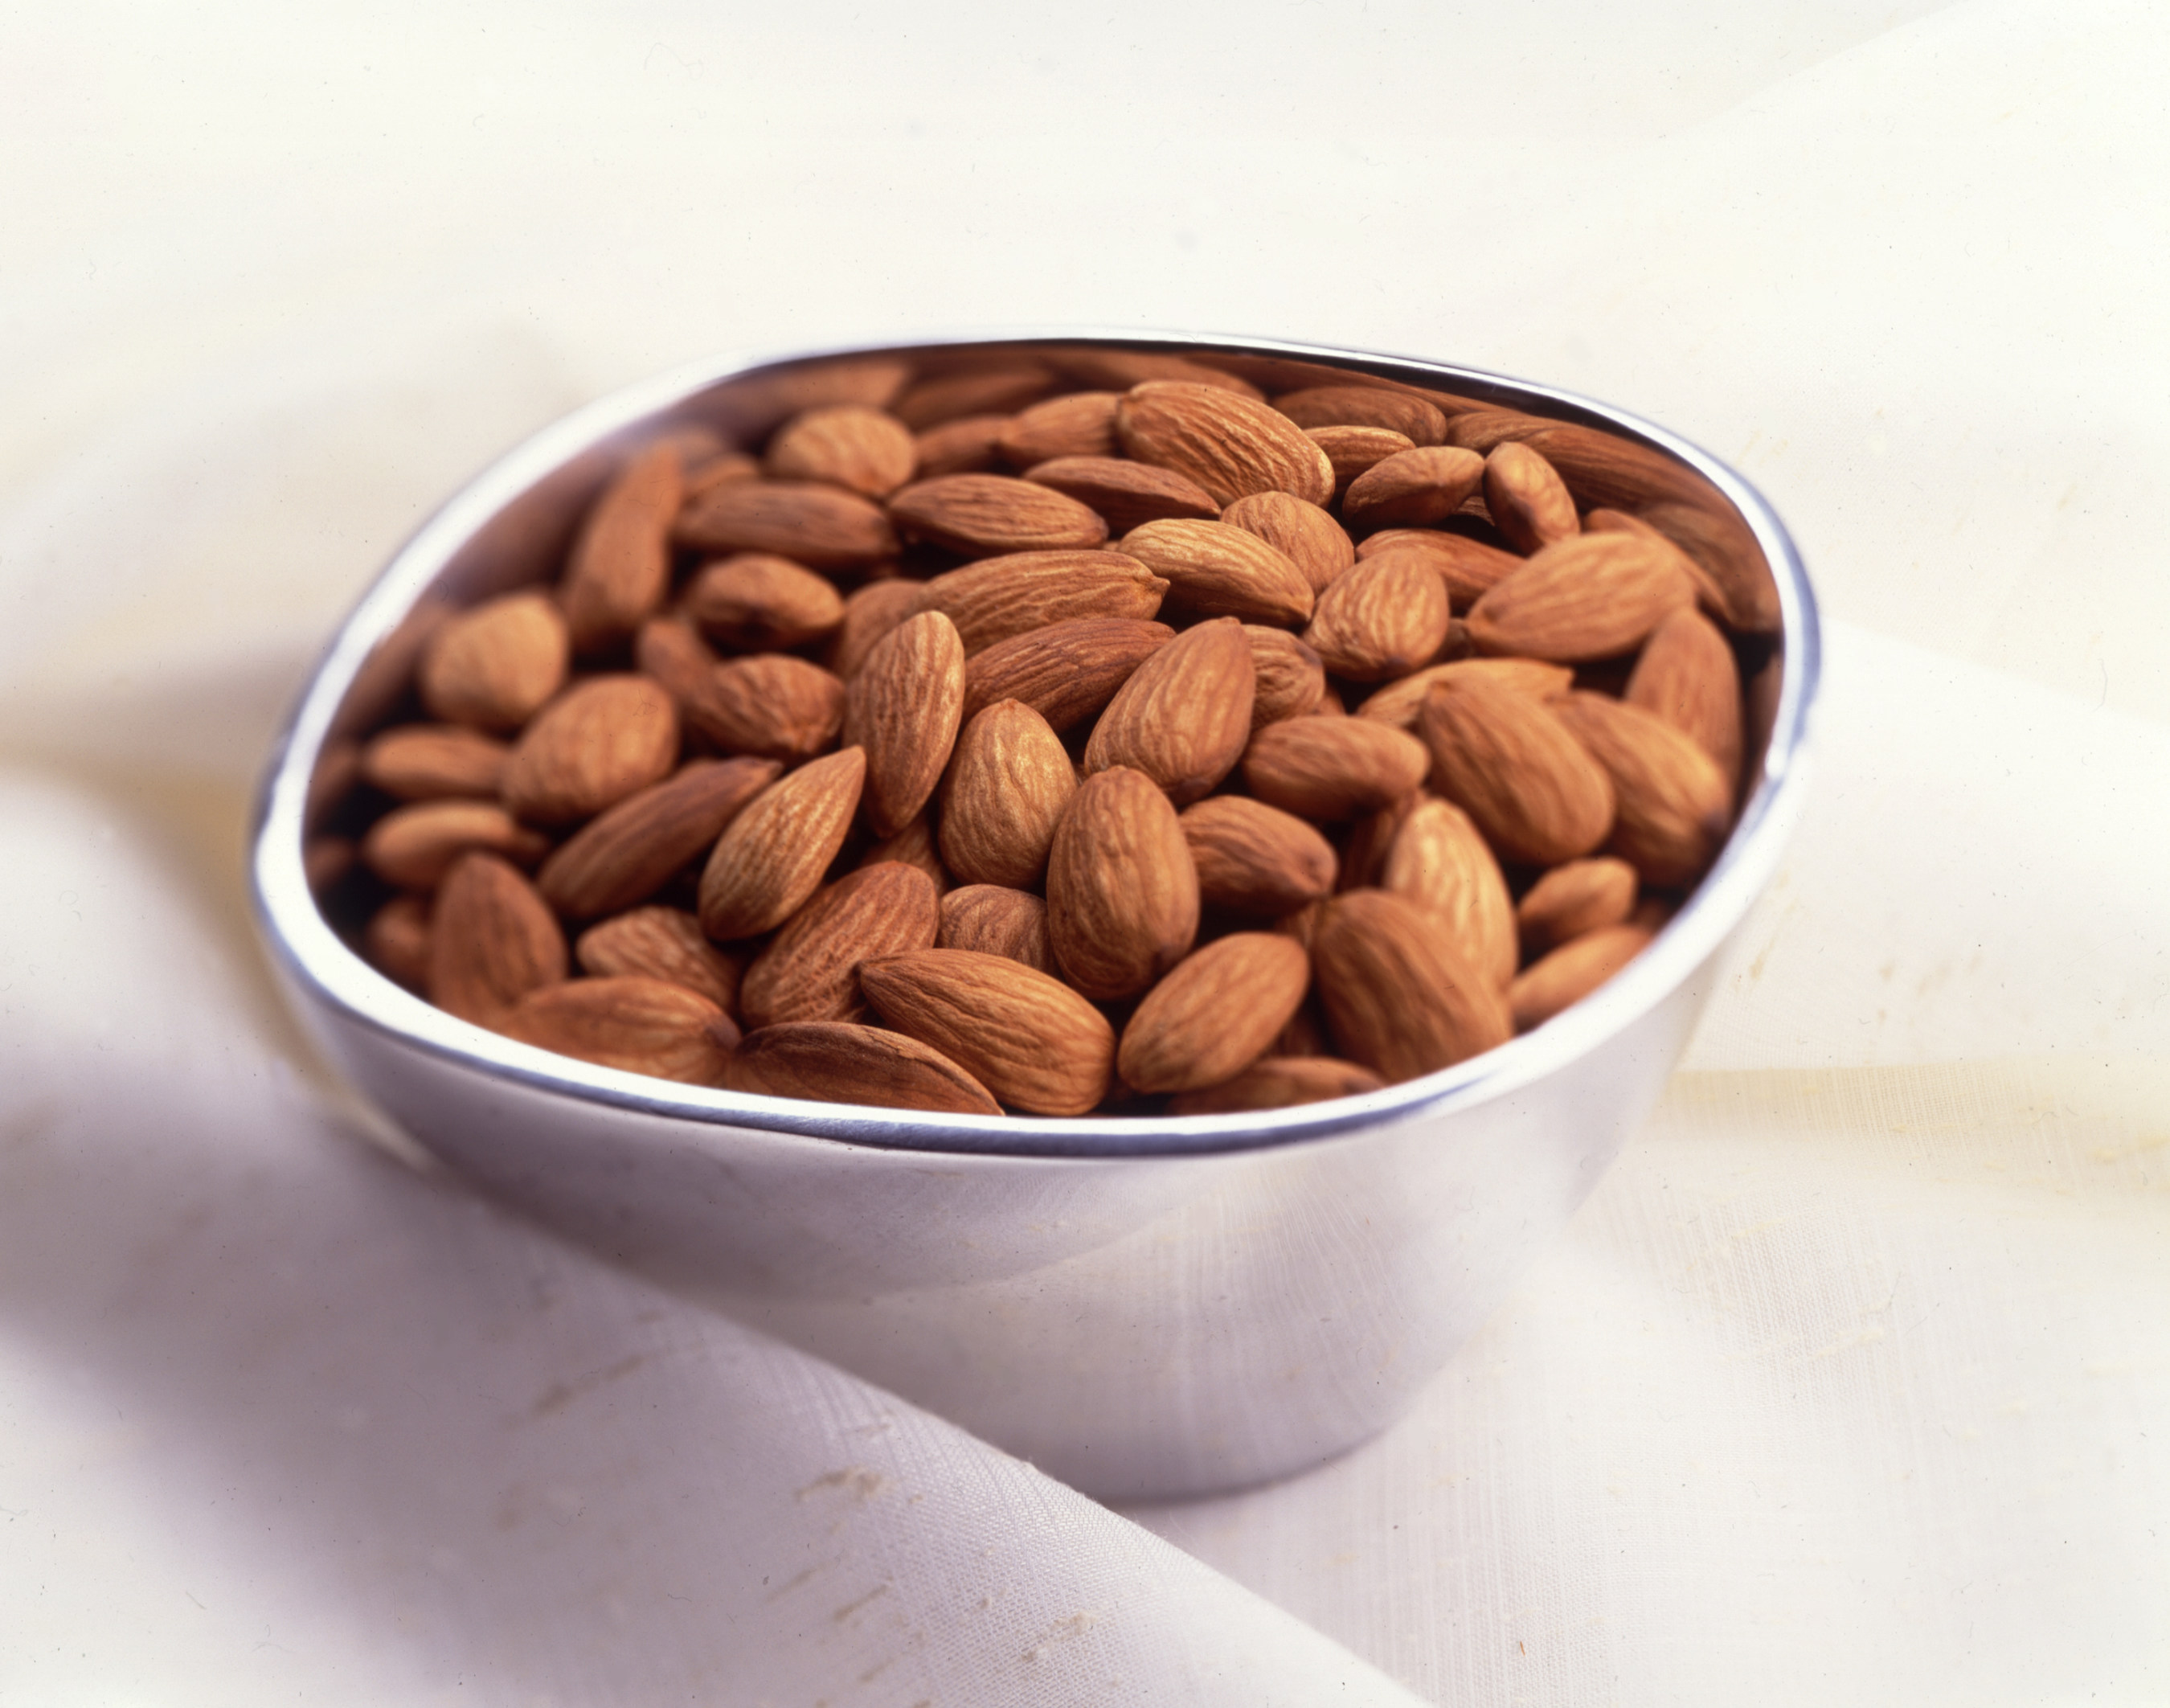 Power-packed almonds can be a source of happiness. (Photo: Almond Board of California) 